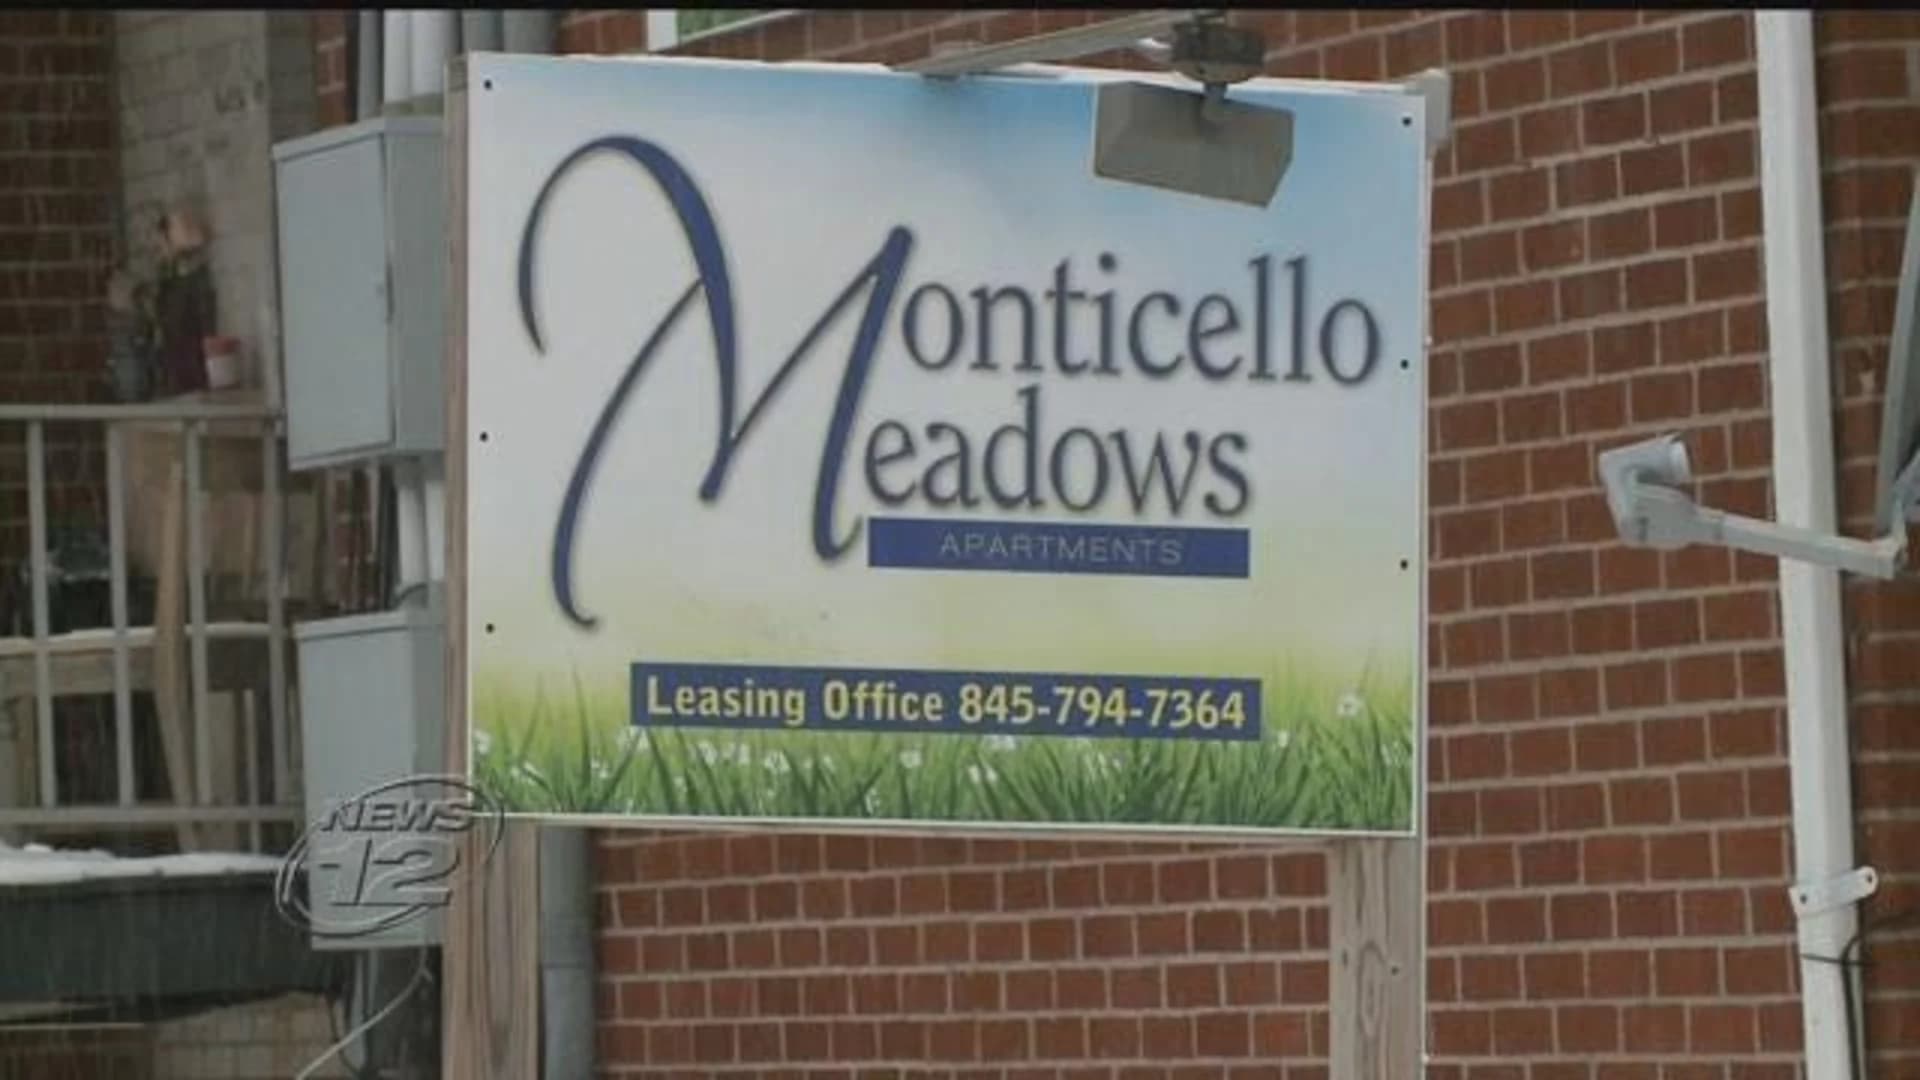 Tenants: No heat, hot water for weeks at Monticello apartment complex